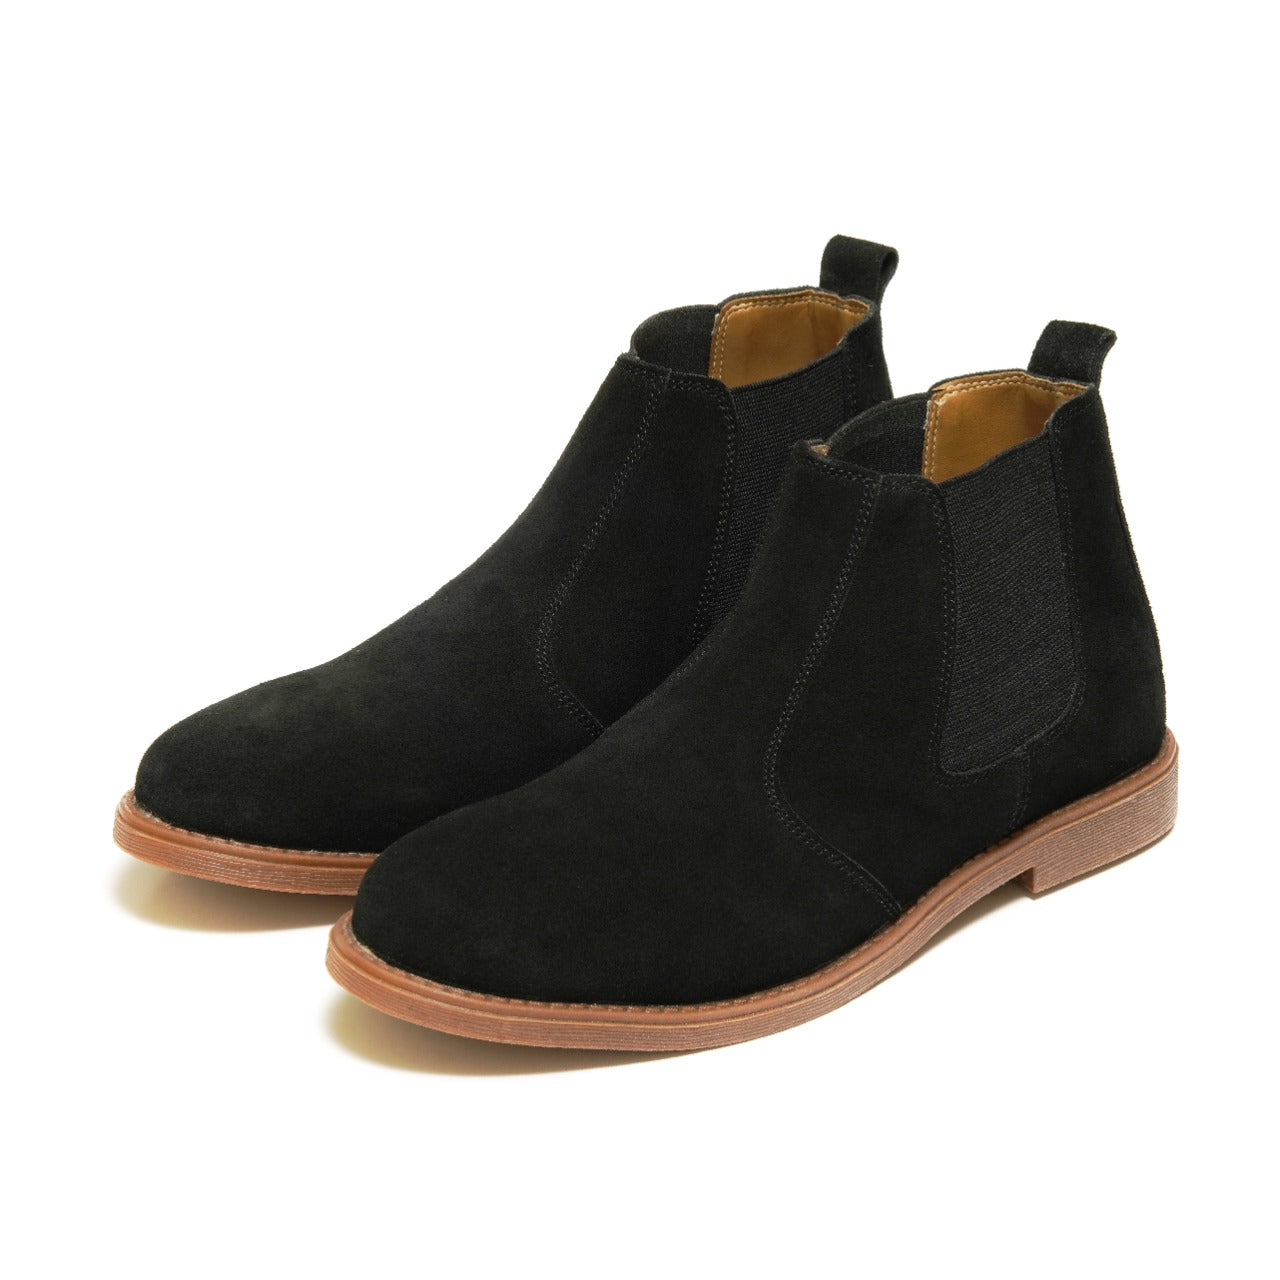 SKU:8011-Black Suede Cow Leather Chelsea boots